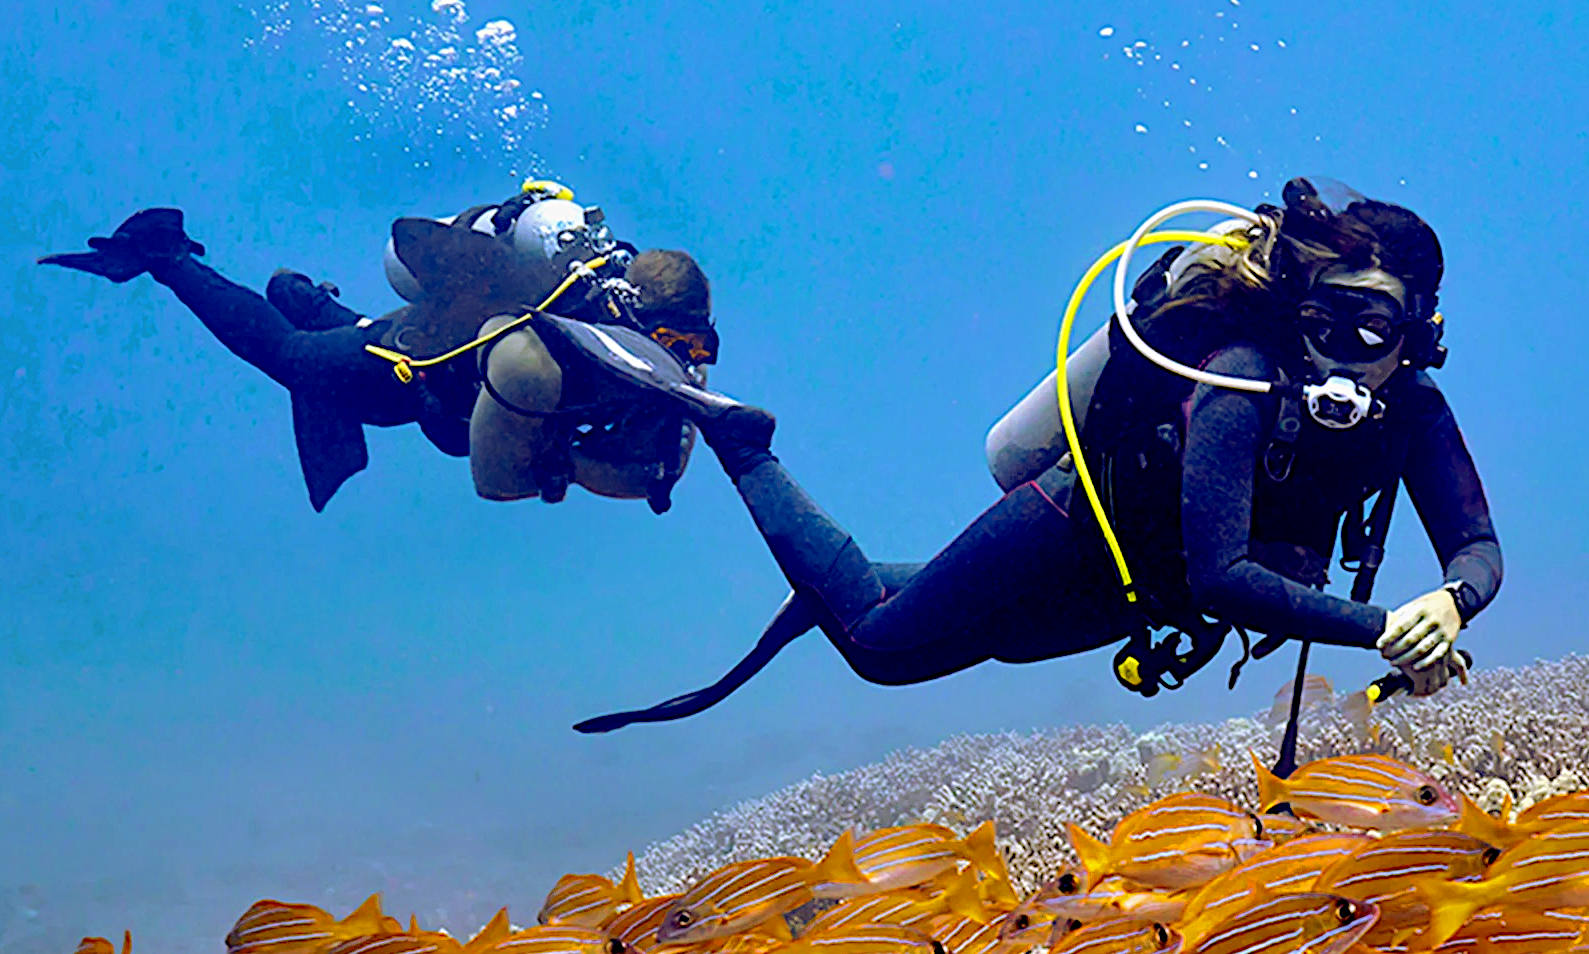 Safiya Sabuka and Musa Bomani, scuba diving in the search for Cleopatra's tomb